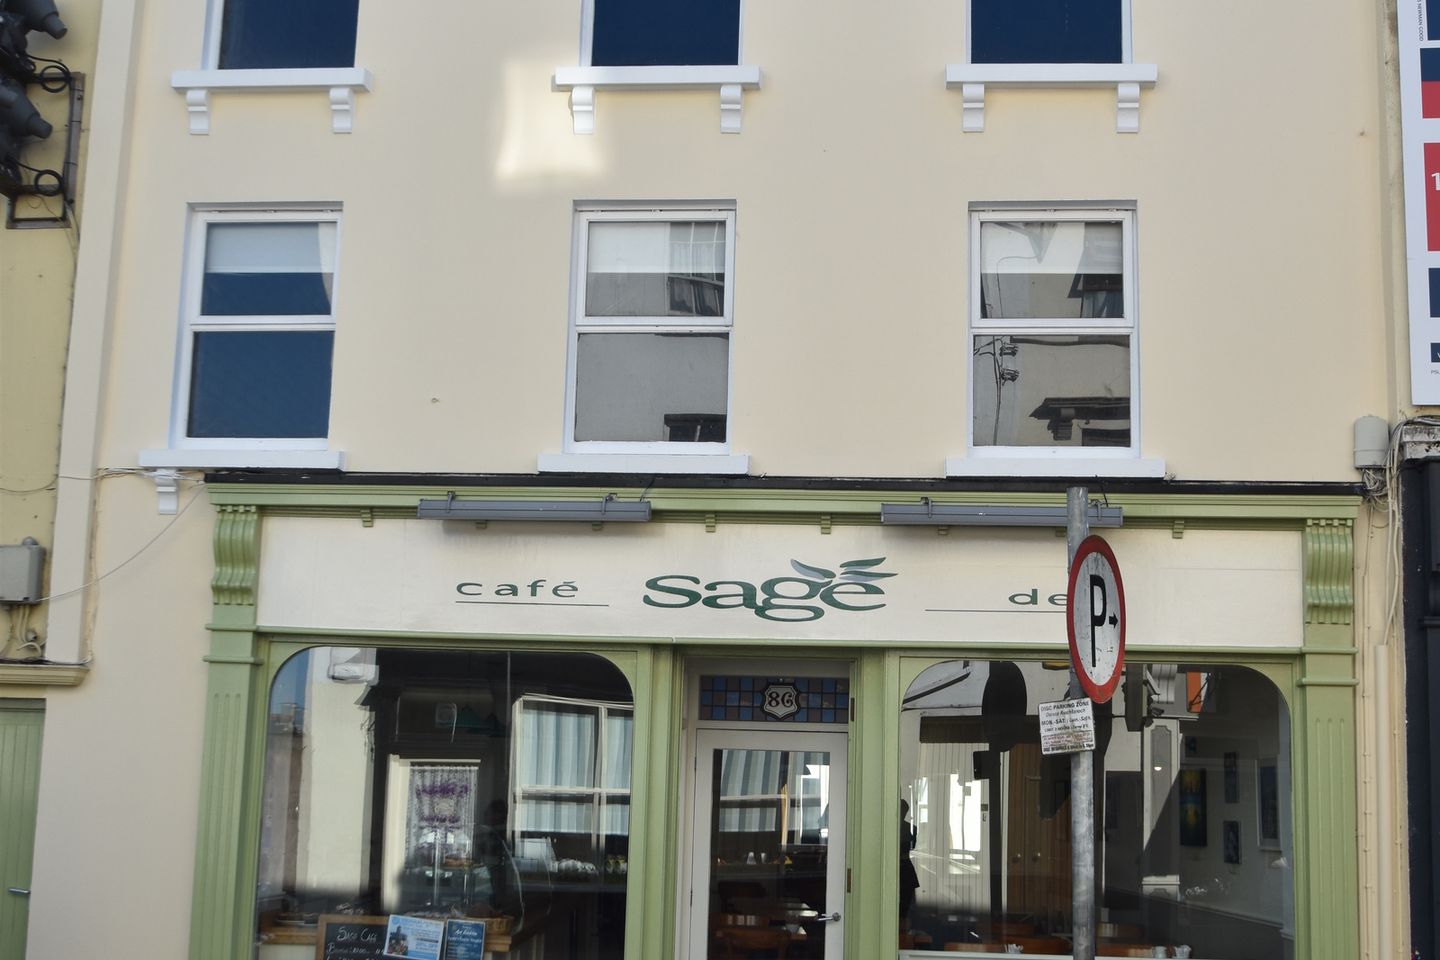 86 North Main Street, Youghal, Co. Cork